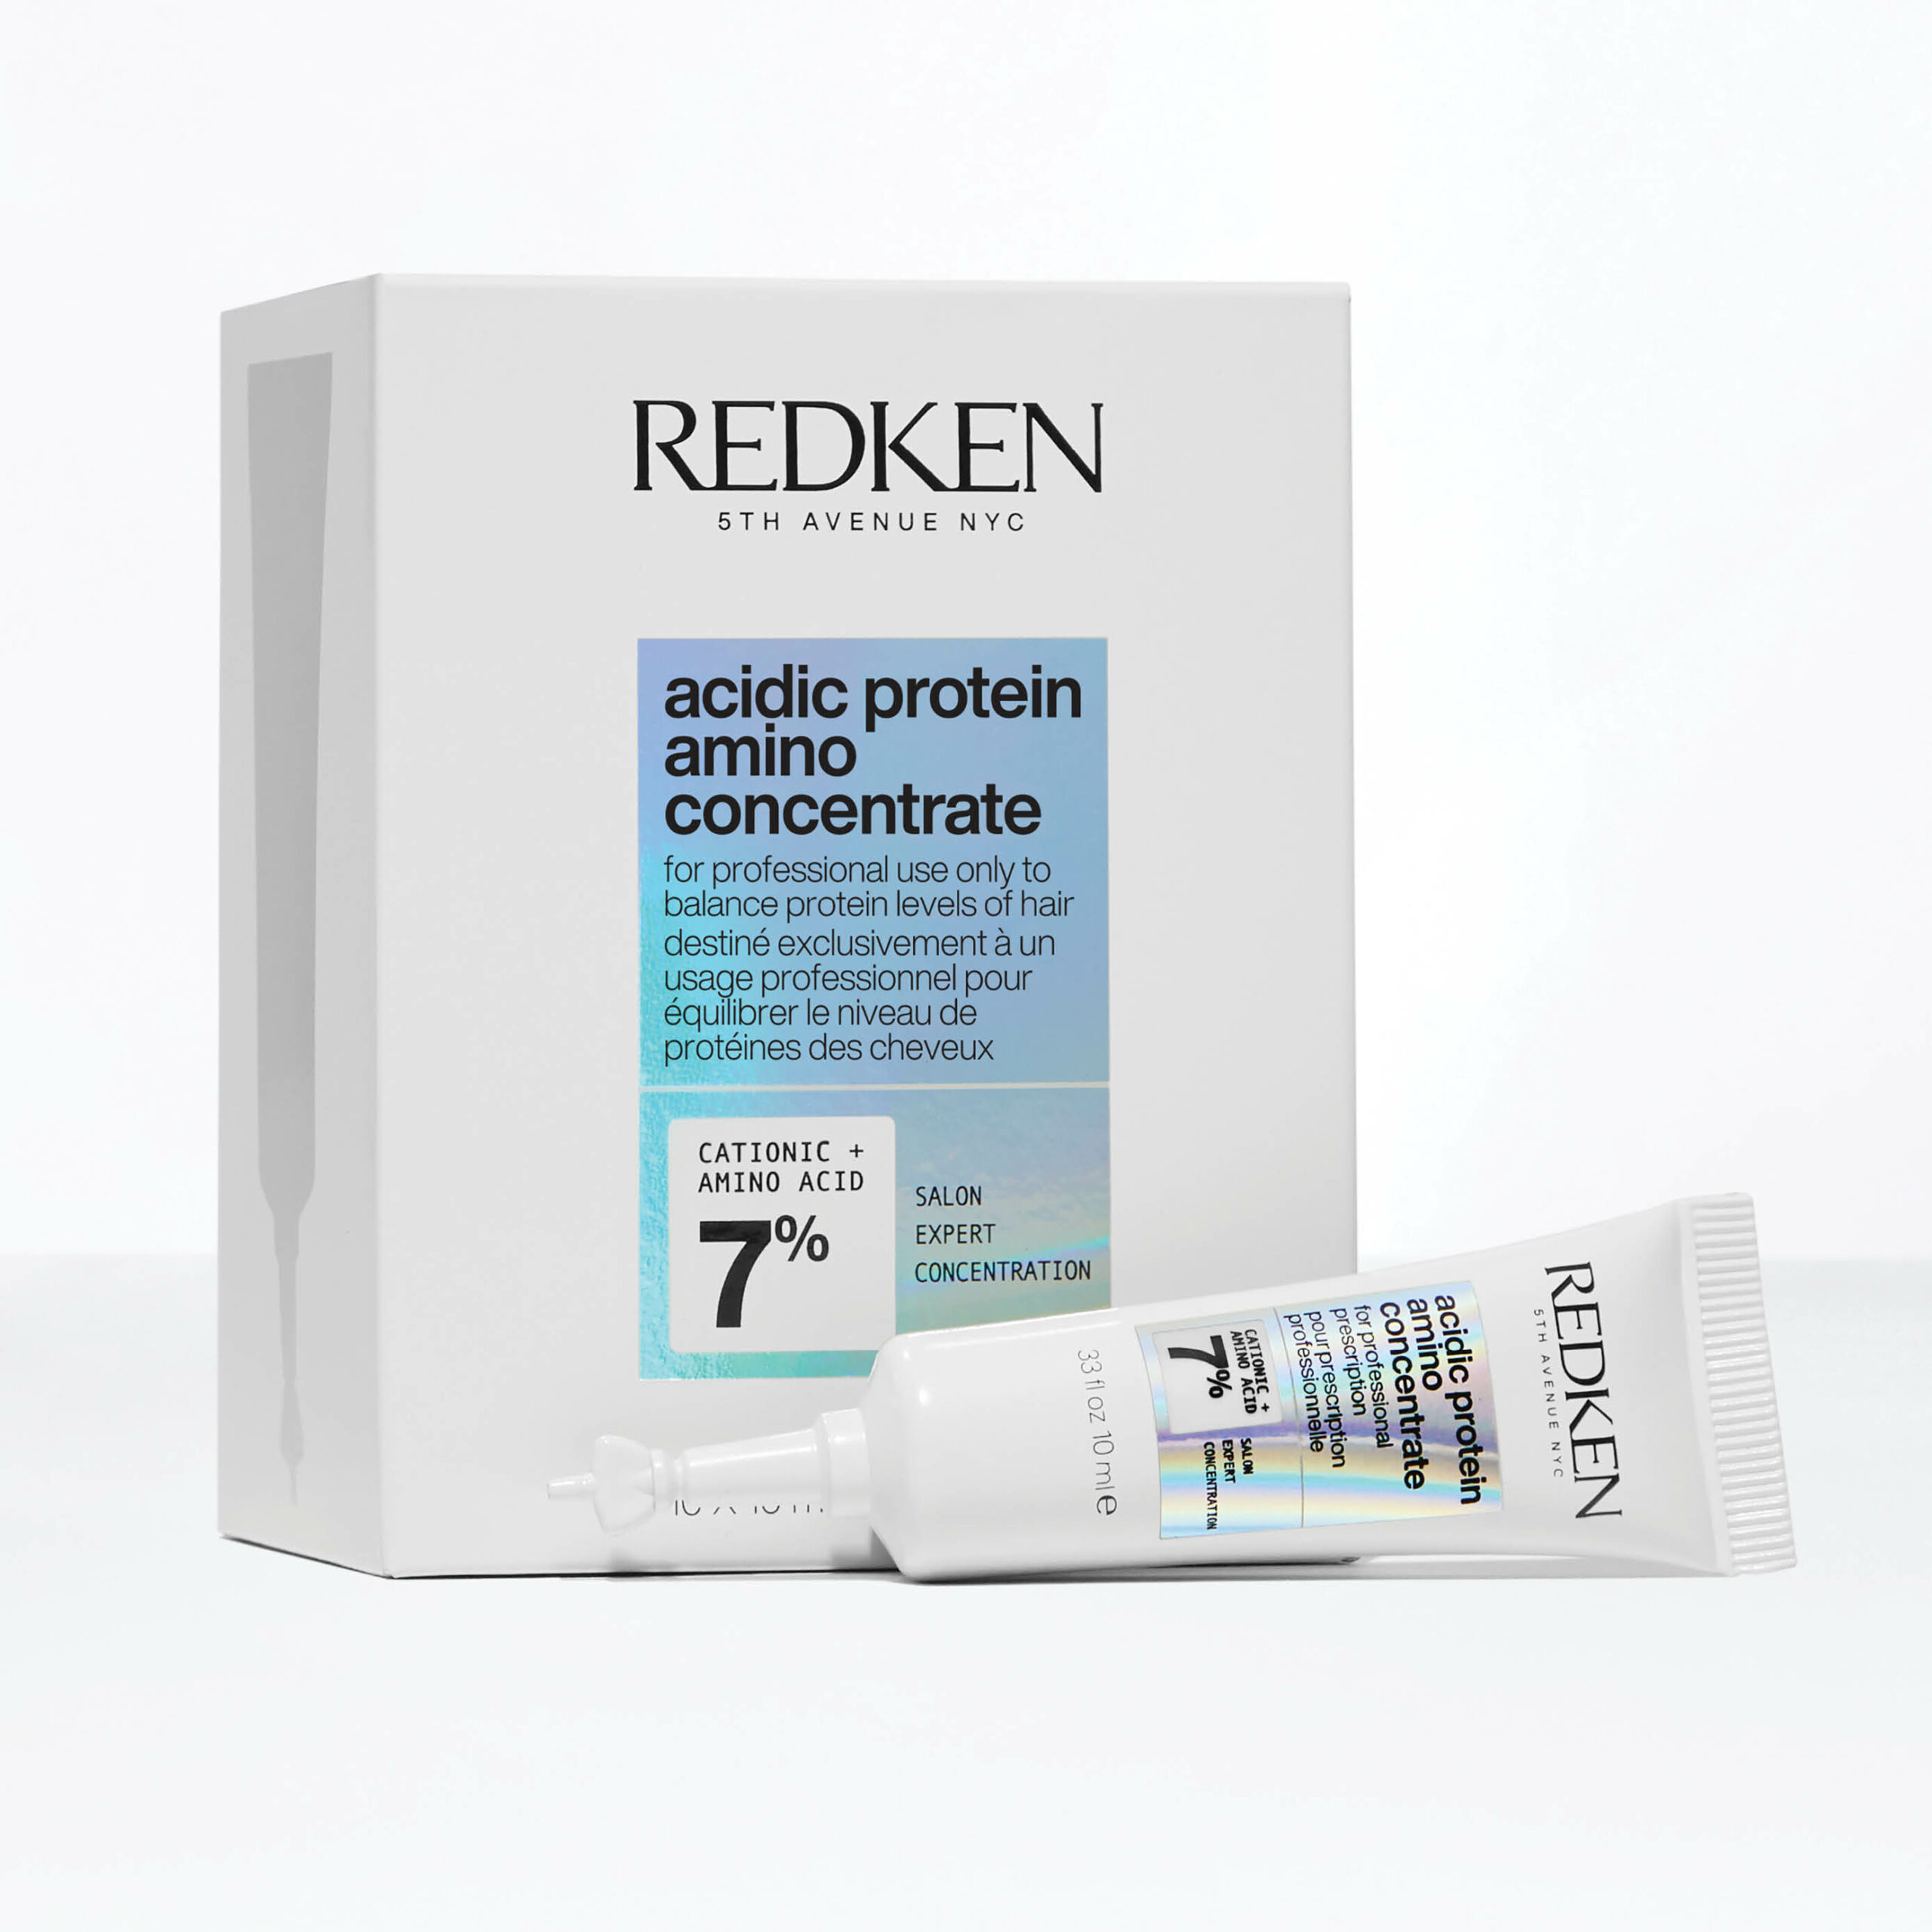 Redken's Acidic Protein Amino Concentrate will 